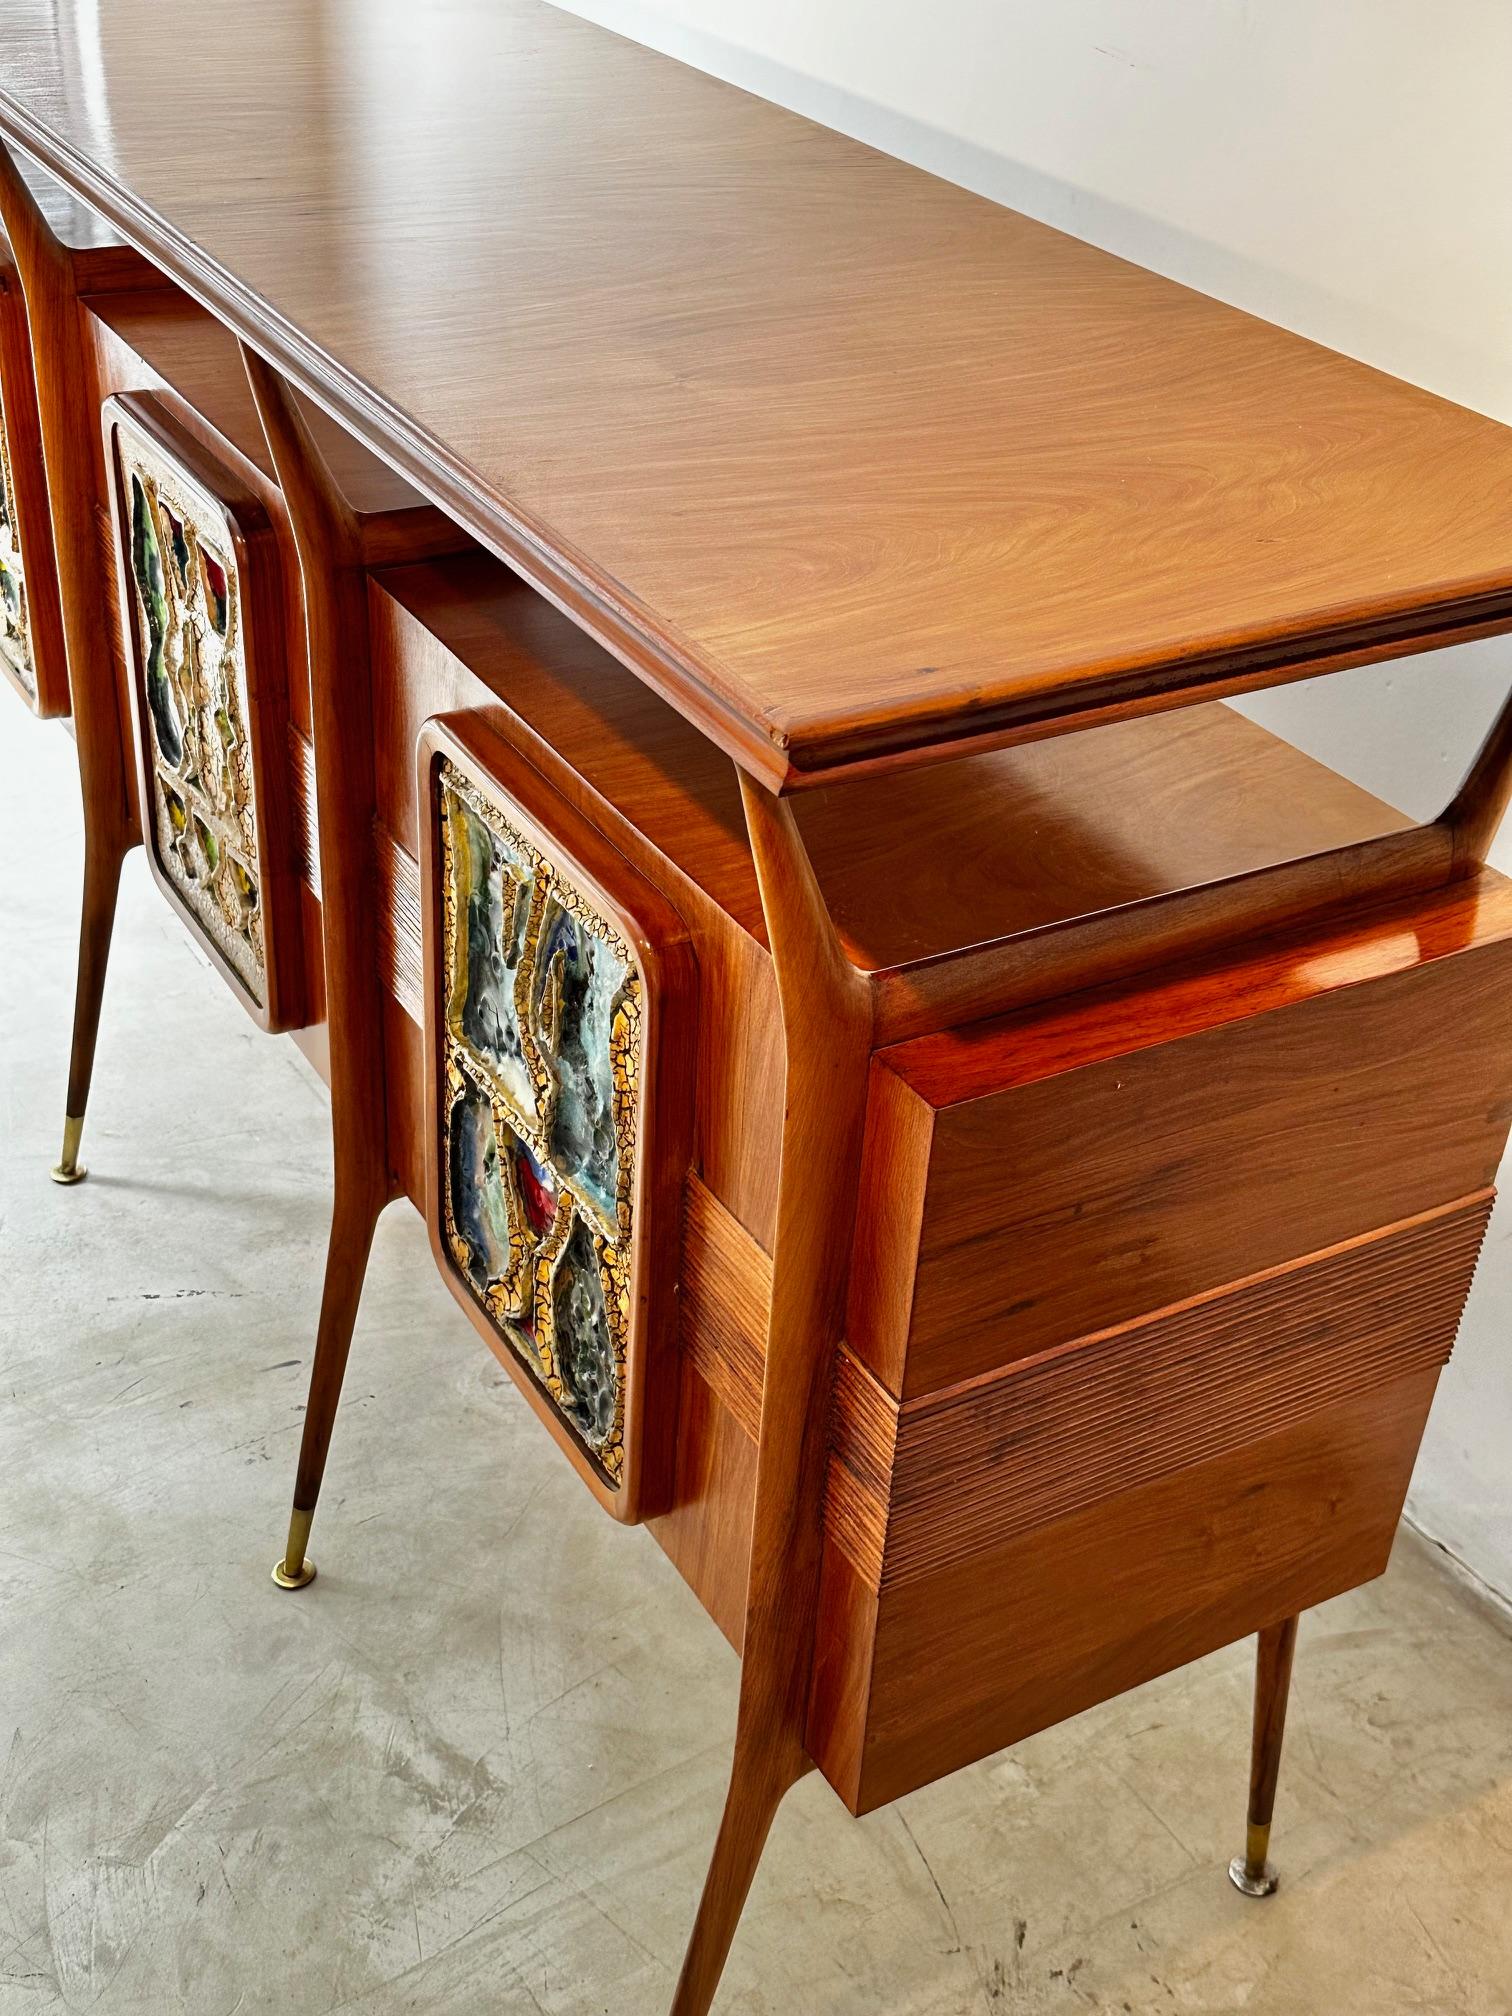 Giuseppe Scapinelli. Custom Mid-Century Modern Bar/Credenza in Wood and Ceramic In Good Condition For Sale In Sao Paulo, SP